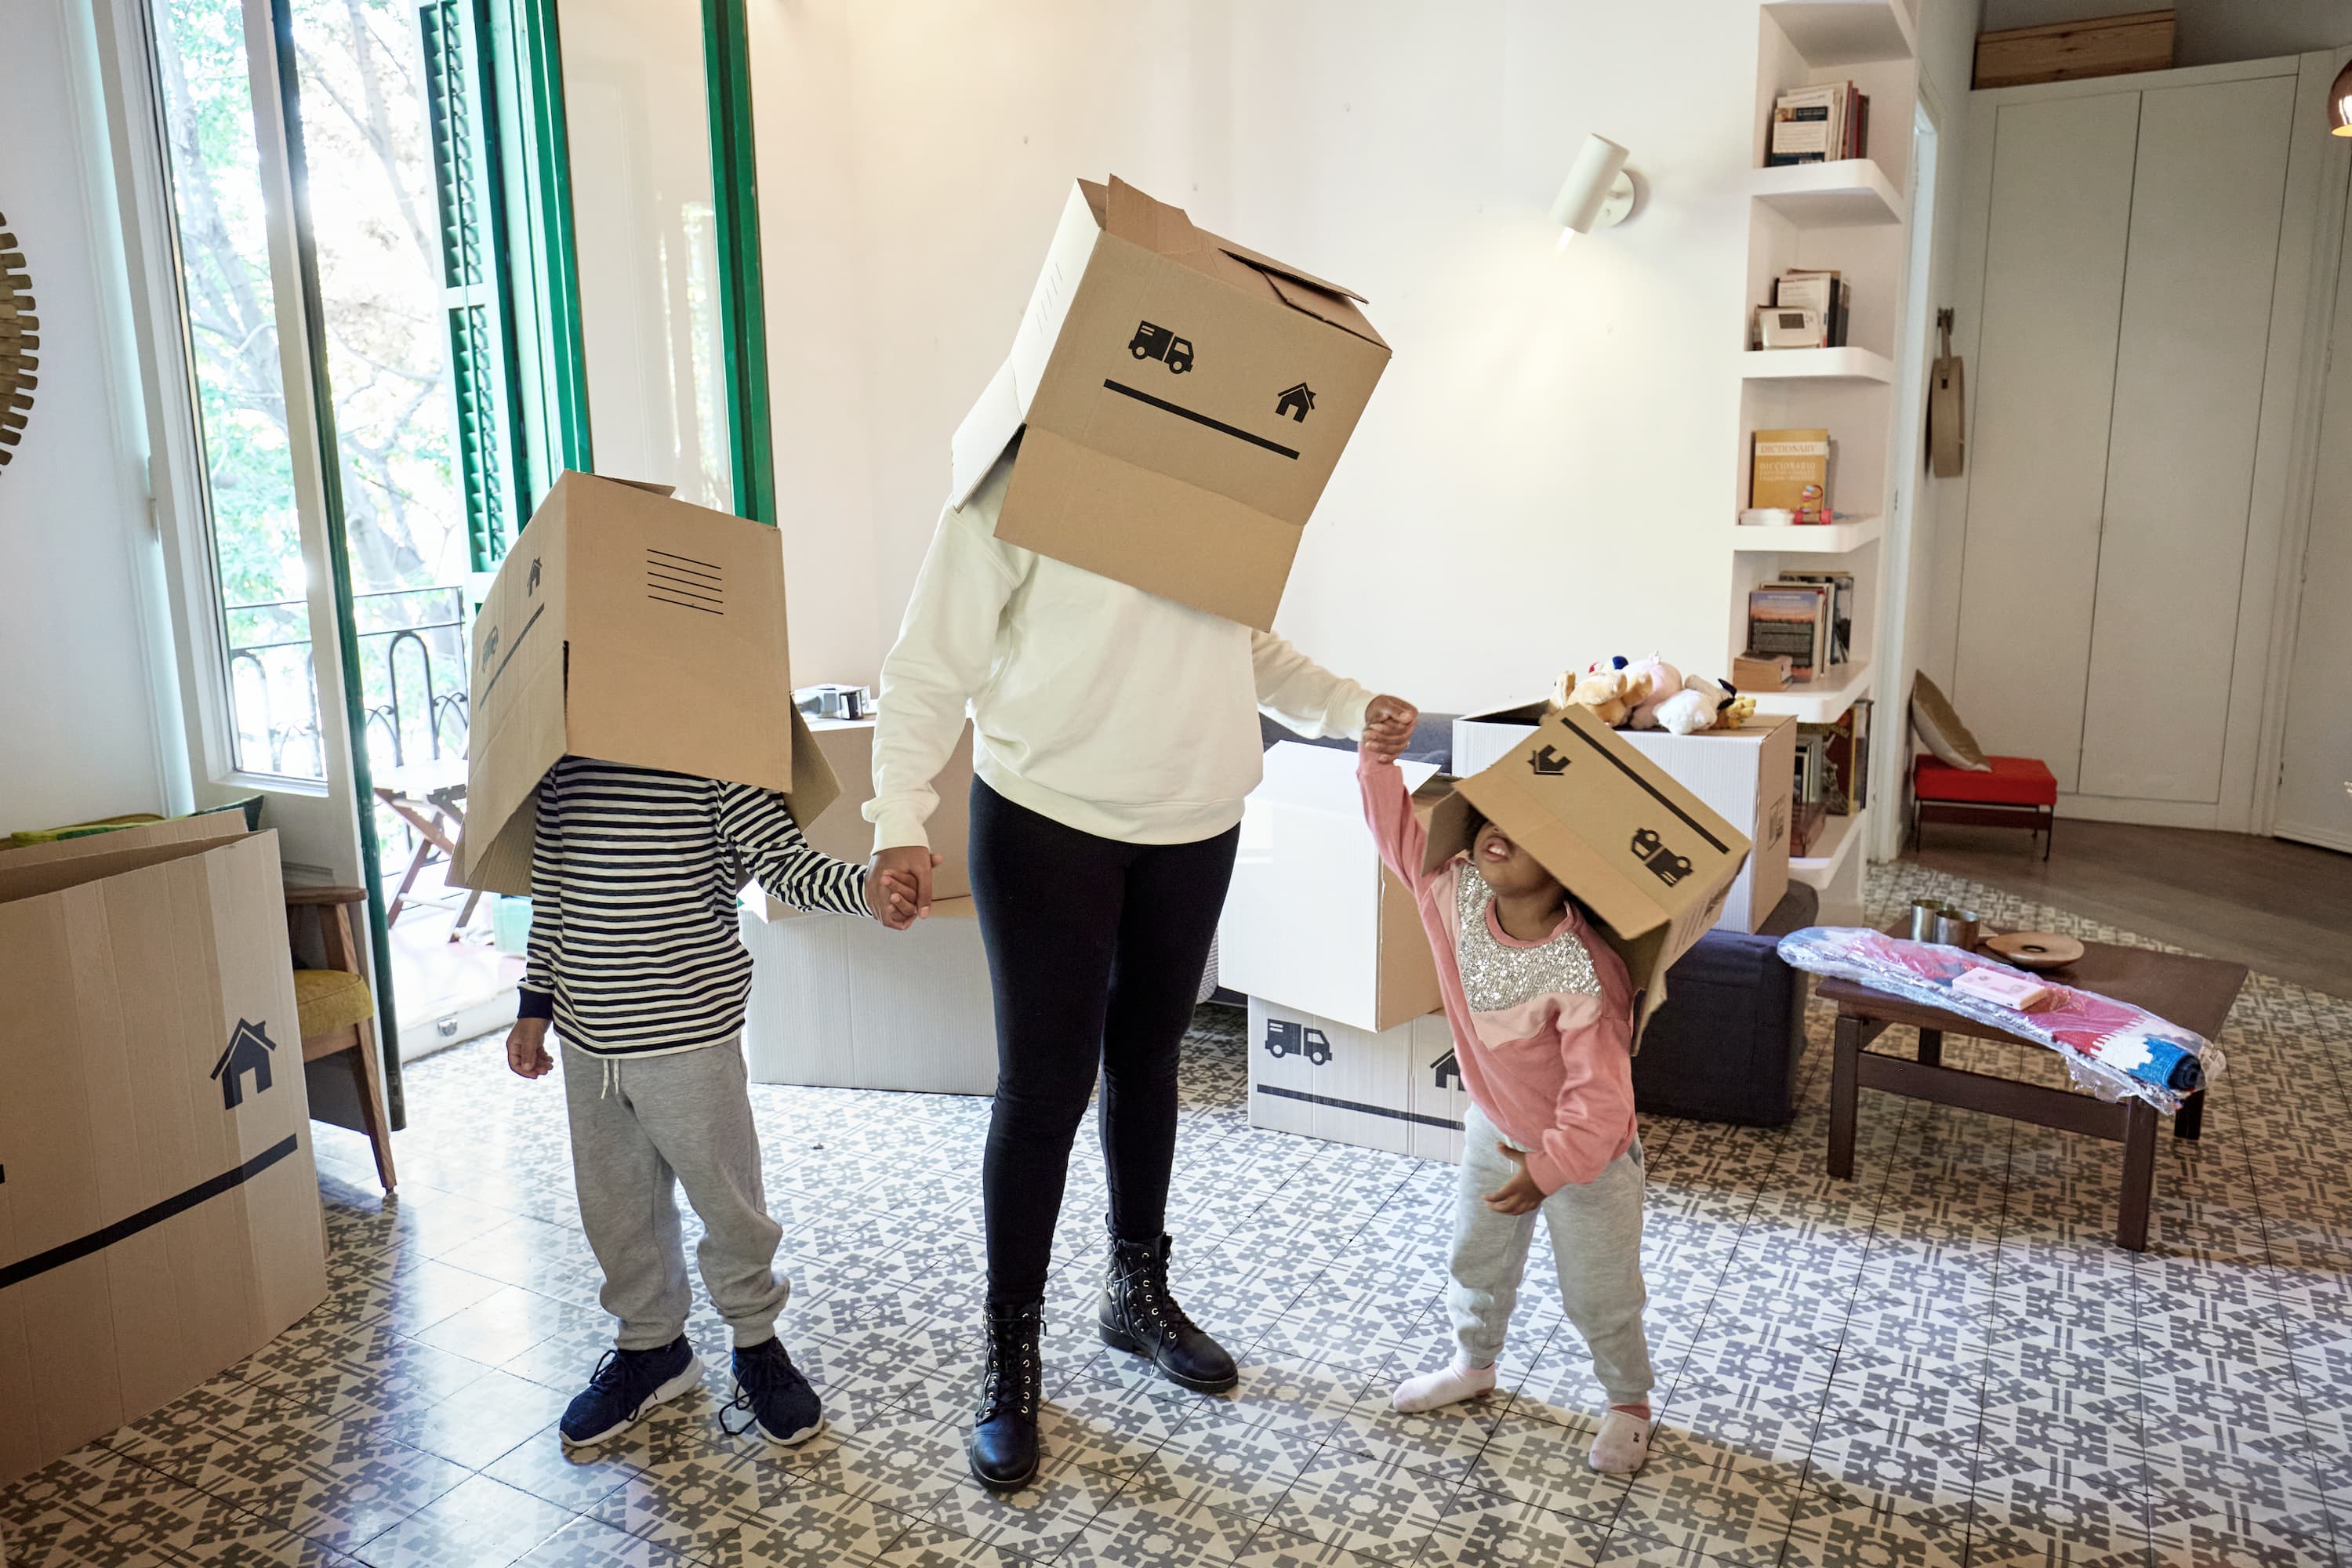 Family with moving boxes on their heads, dressed as robots